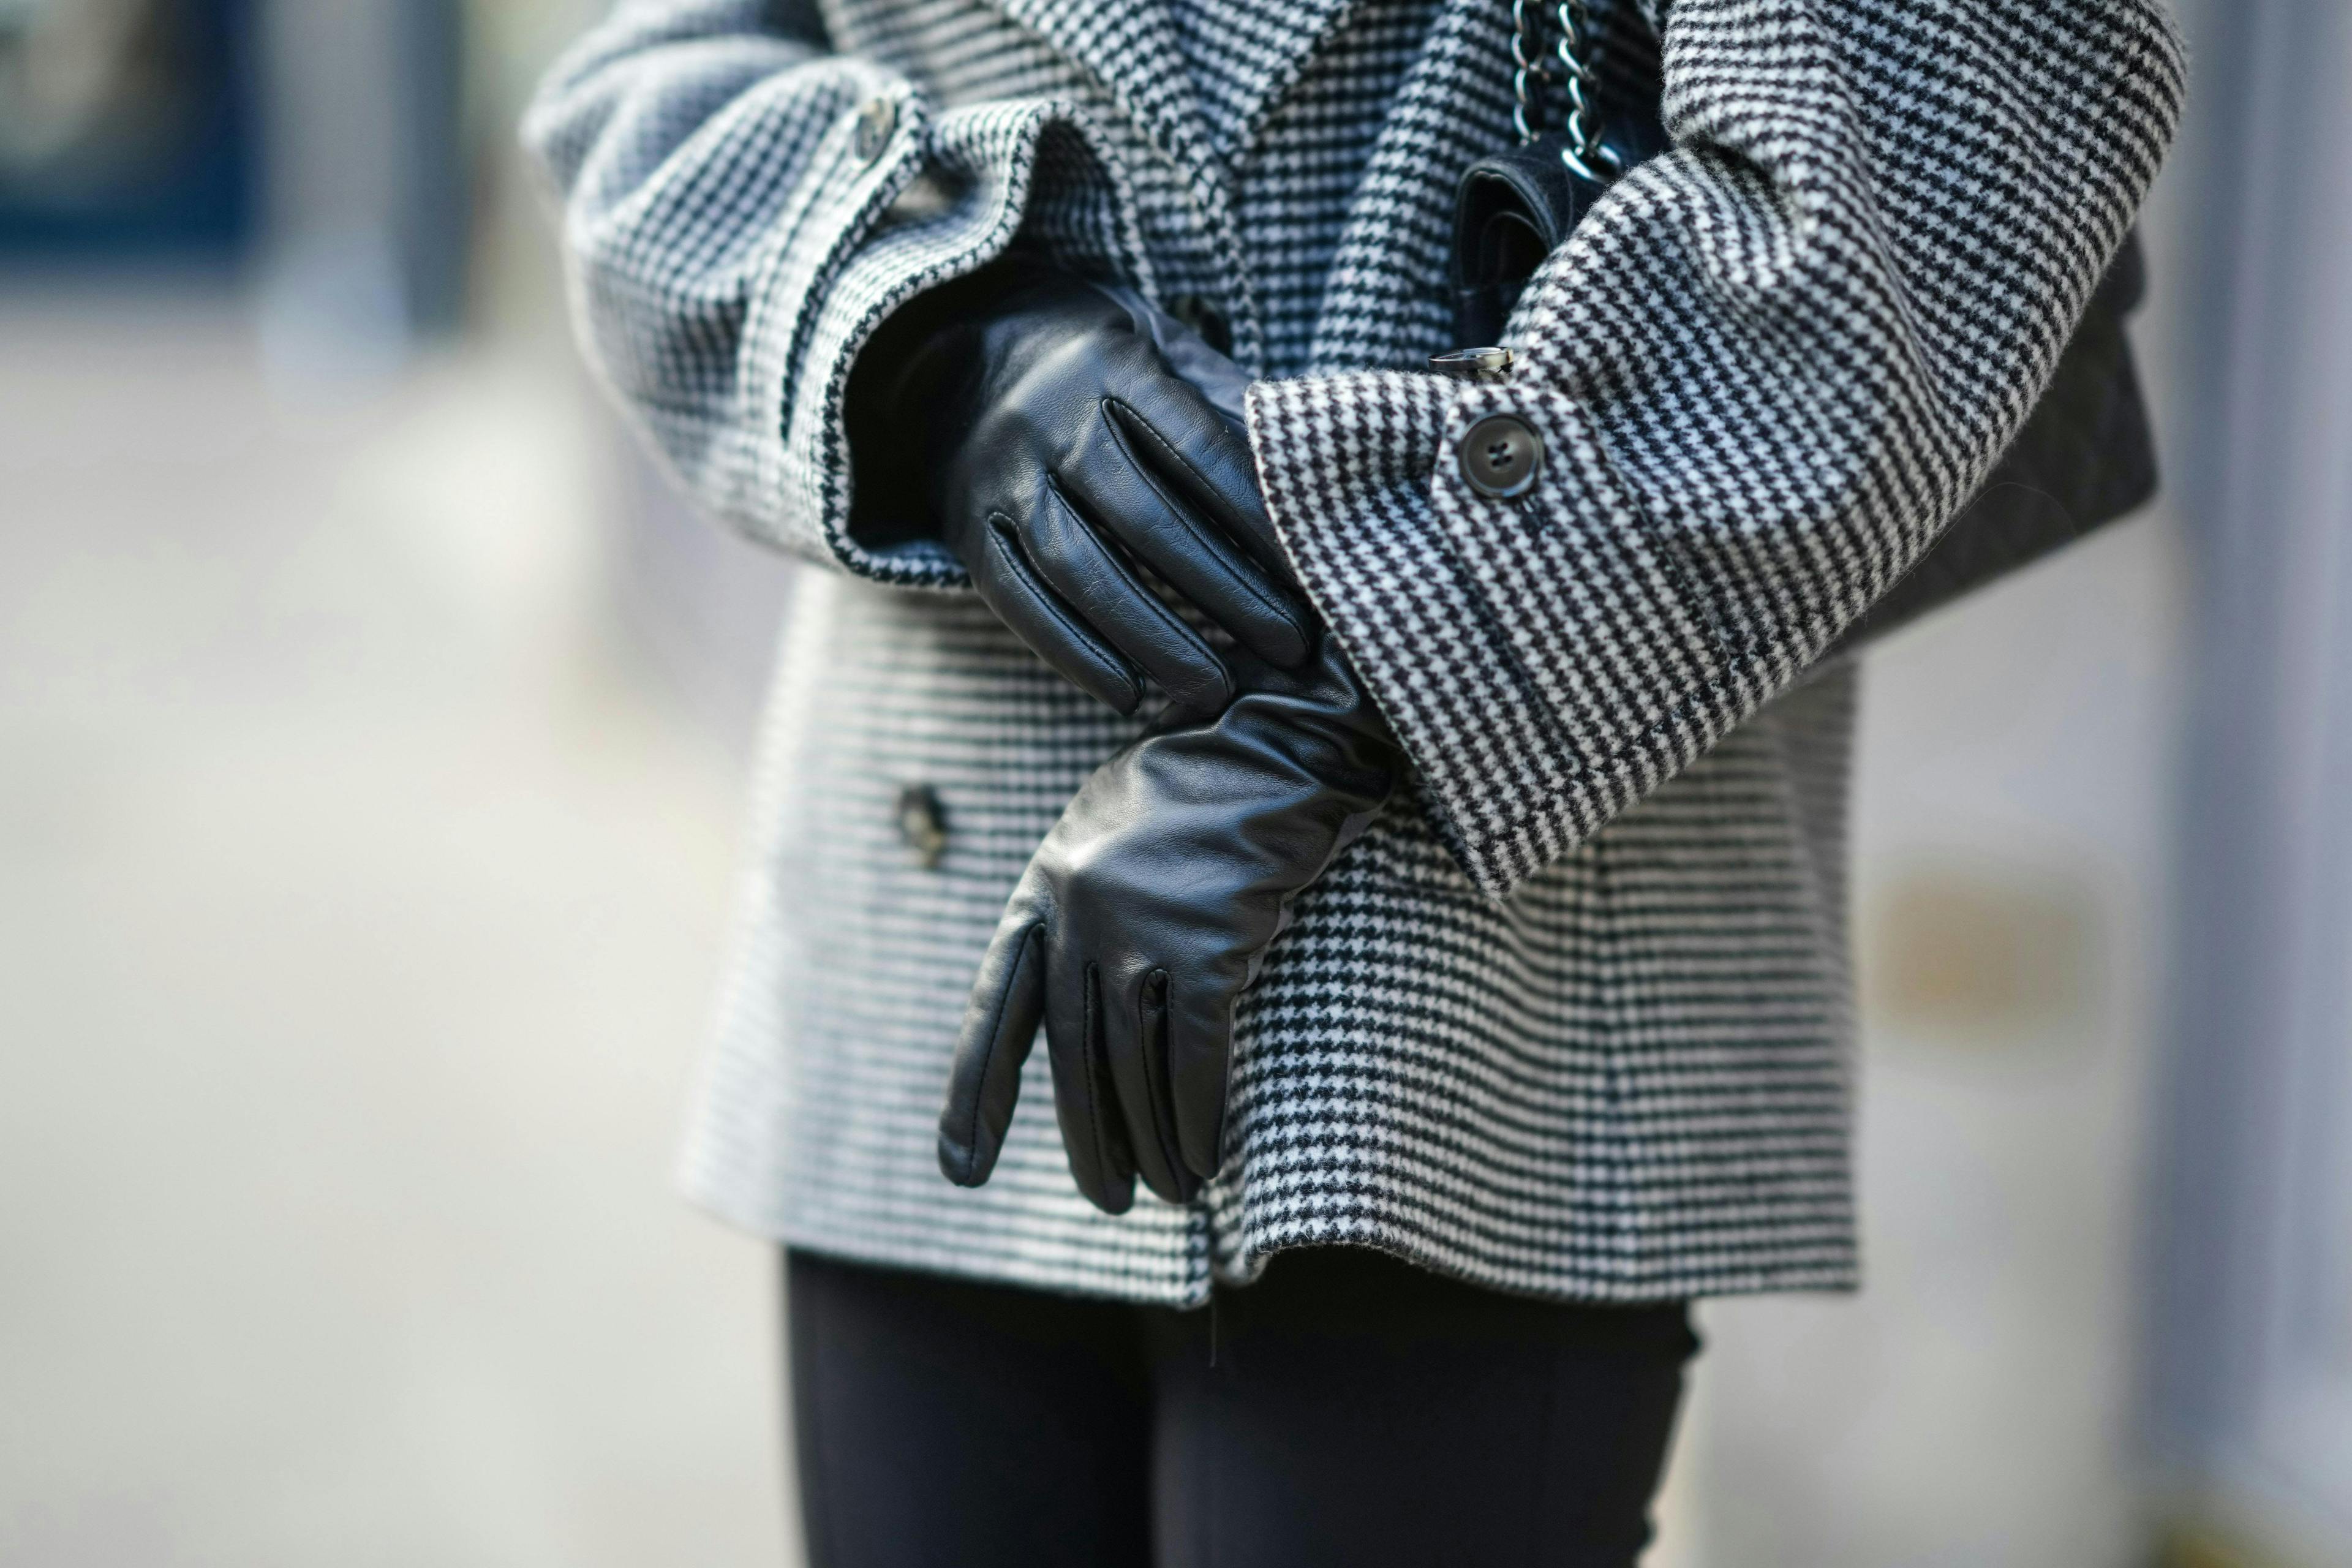 style woman paris fashion blogger outfit ready-to-wear rtw winter outfit autumn outfit detail clothing apparel person human